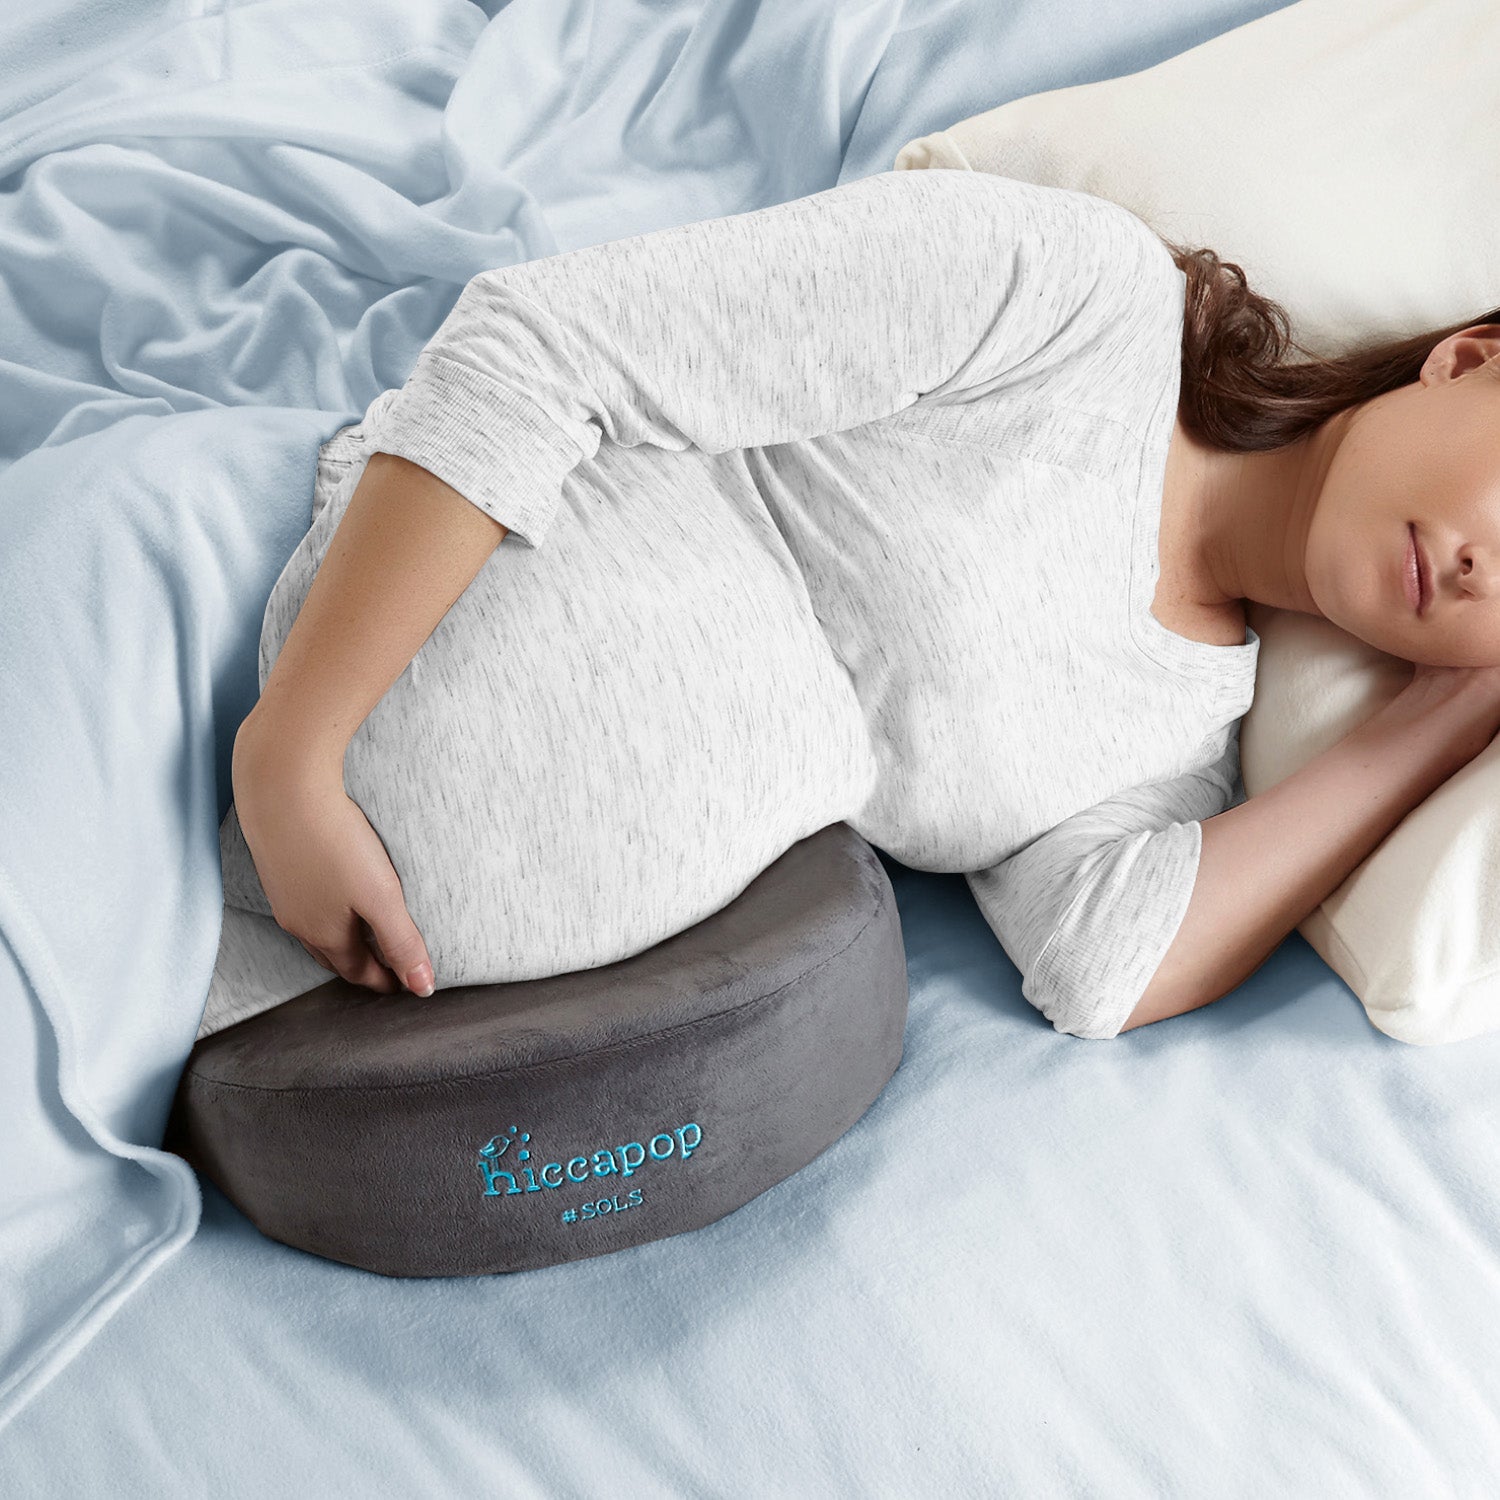 A Wedge Pillow for Hip Pain Can Help You Sleep